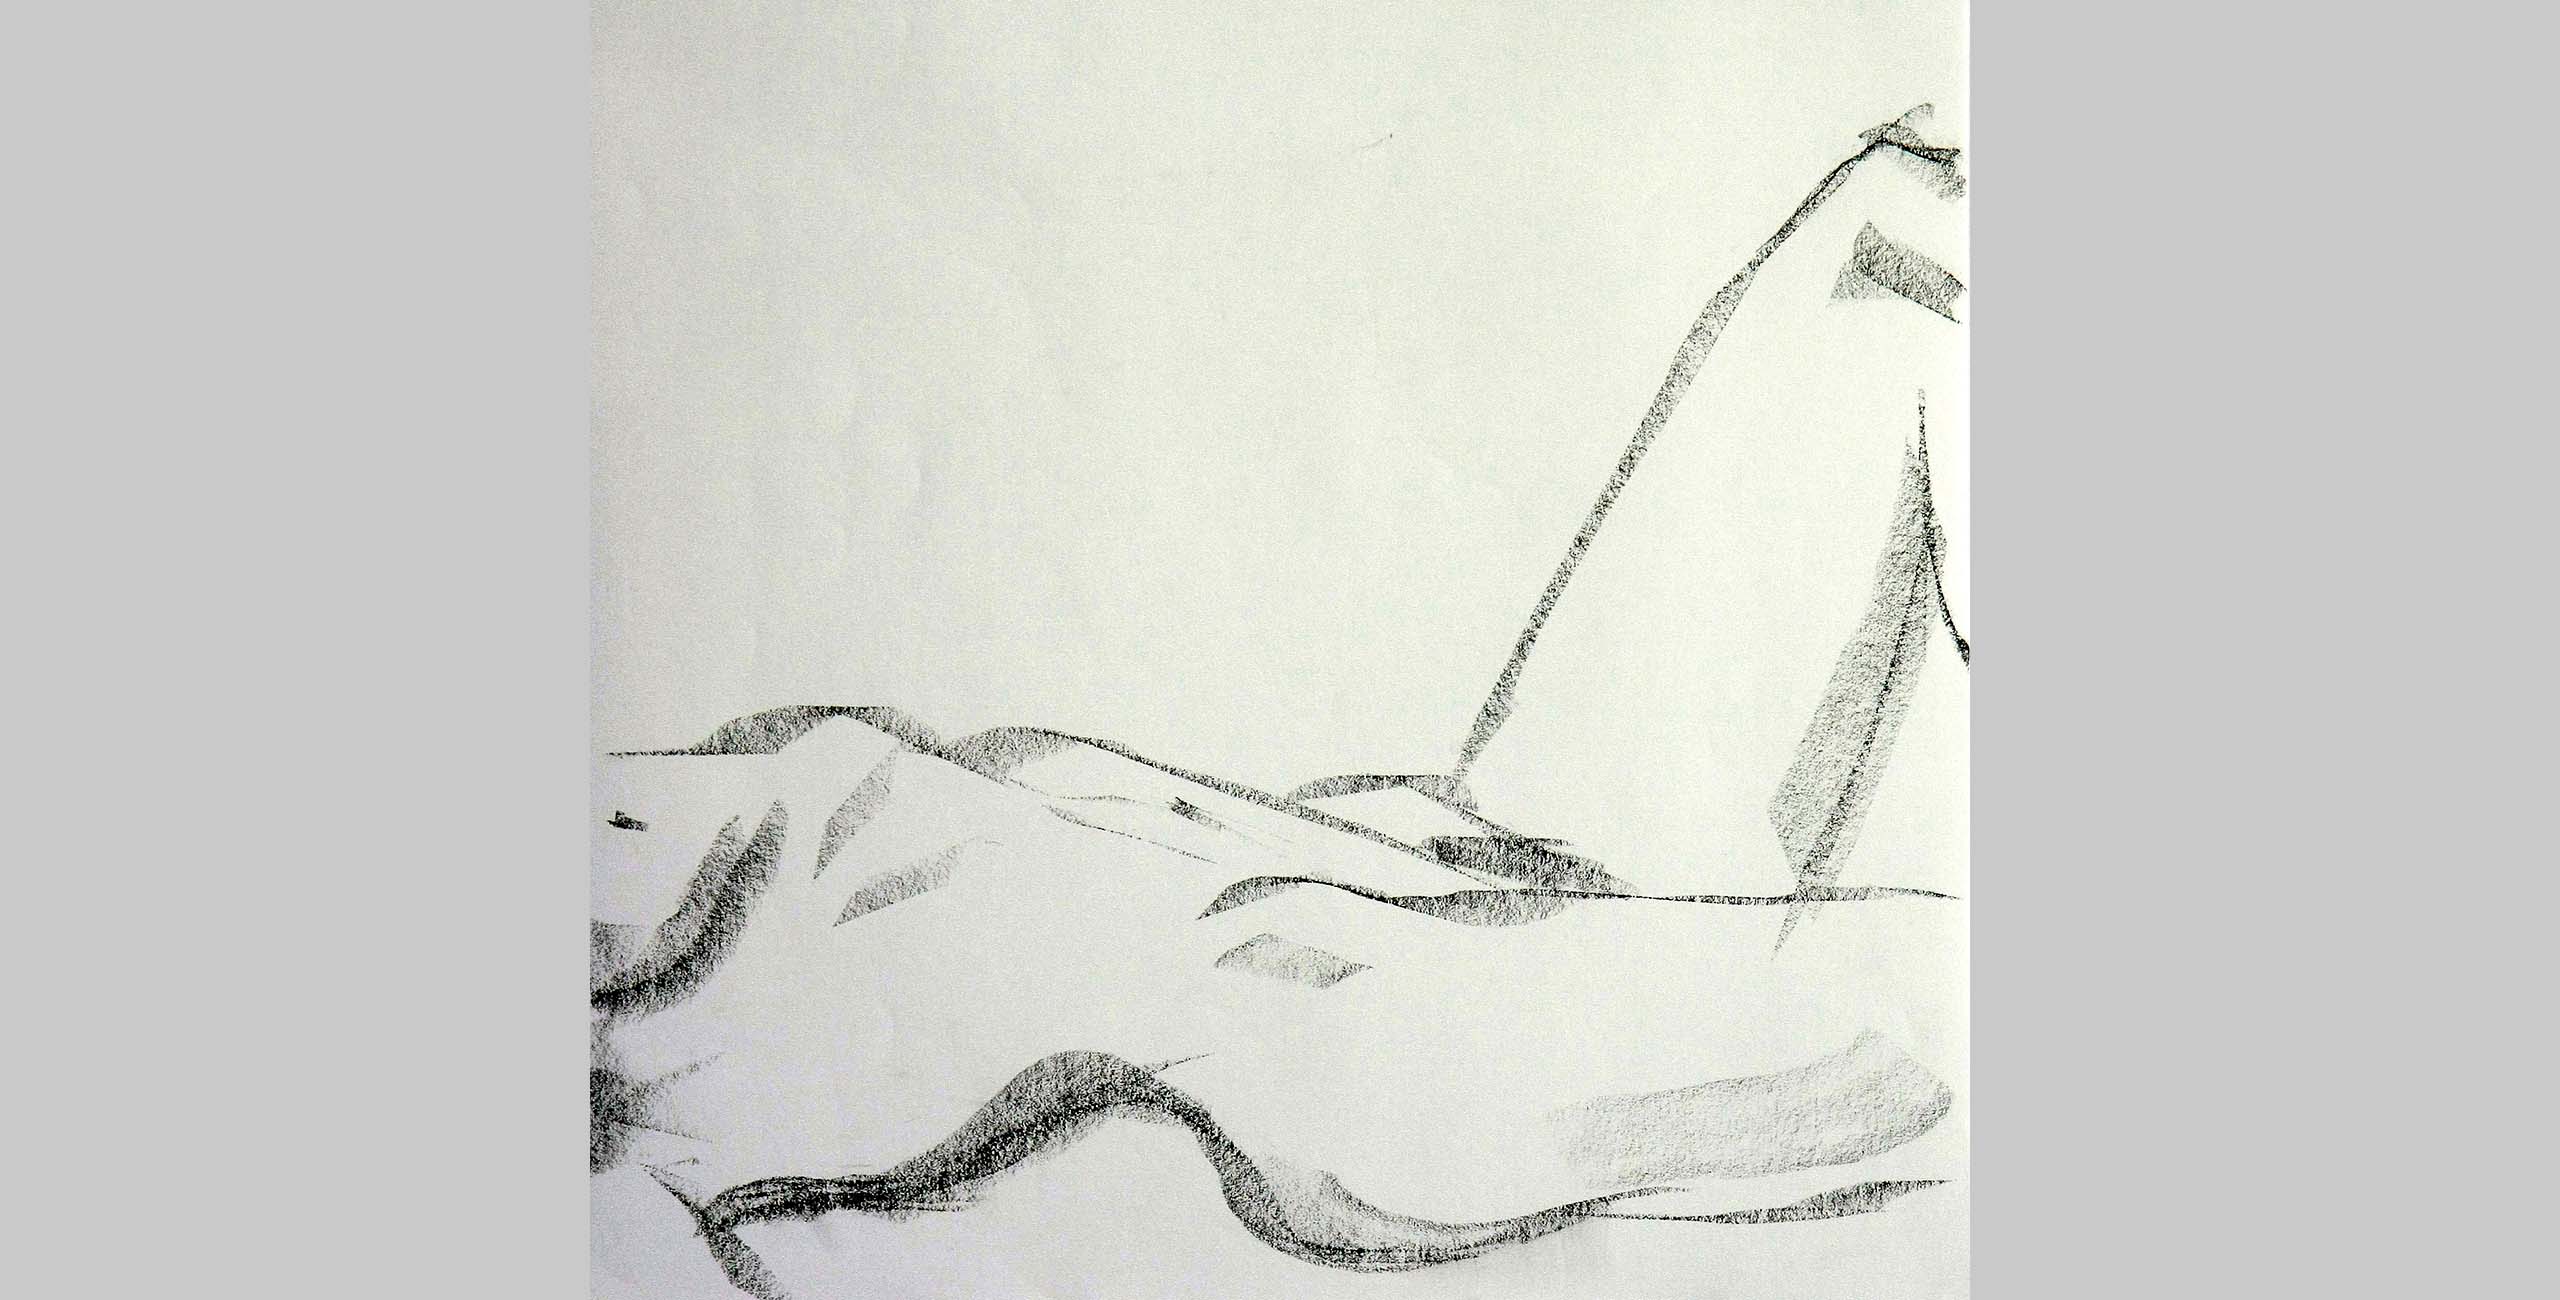 Arching Torso, 2011, charcoal on paper